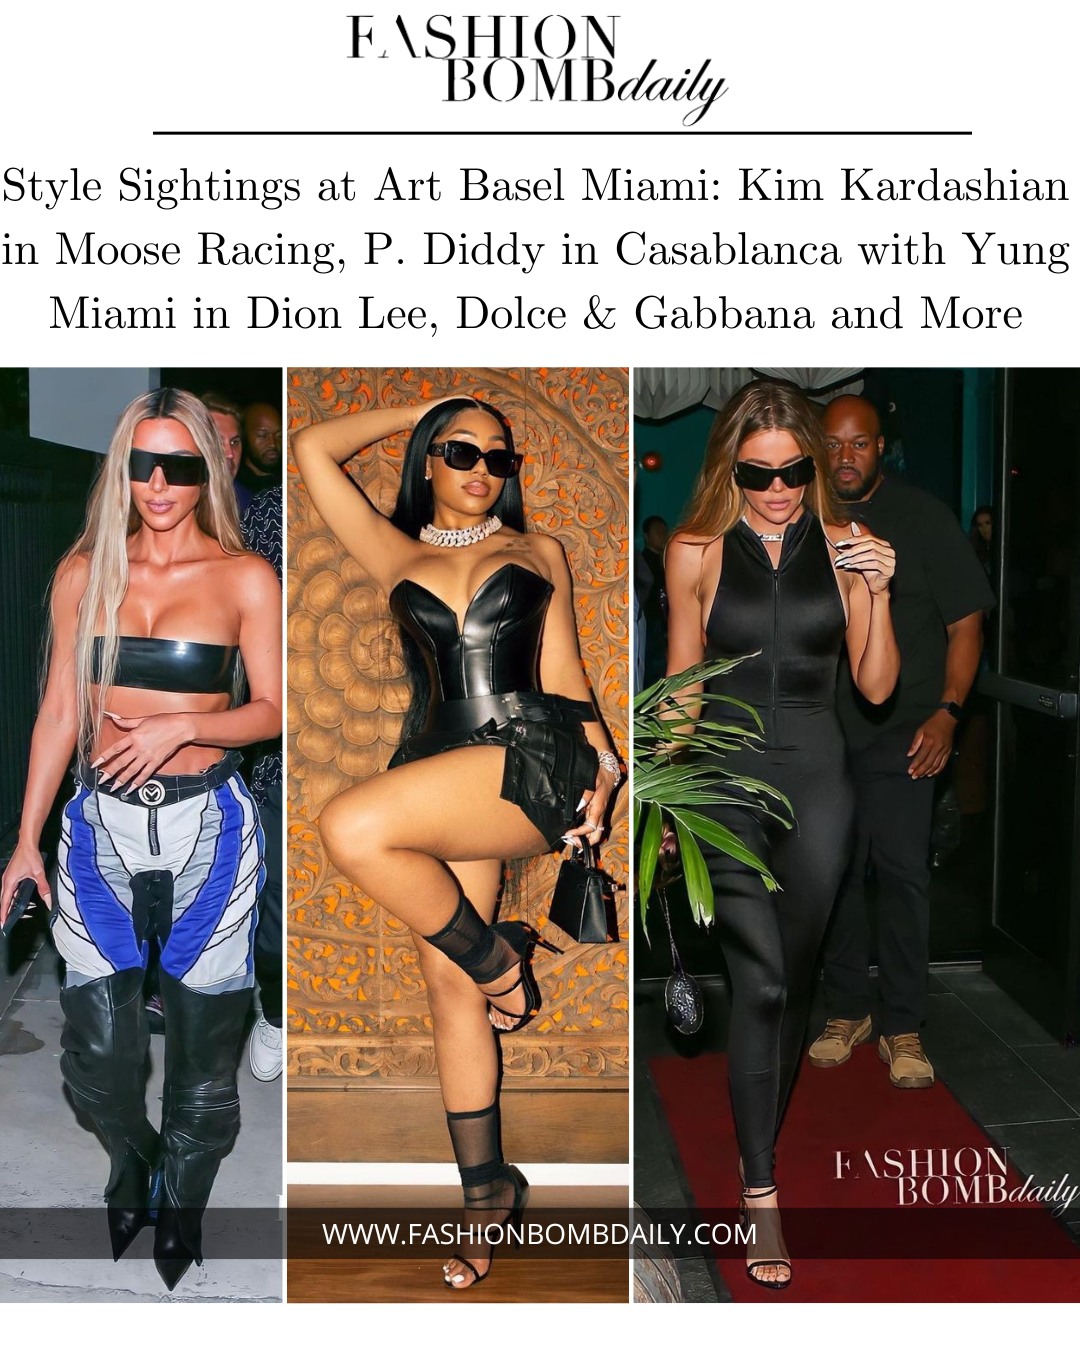 Style Sightings at Art Basel Miami Kim Kardashian in Moose Racing P. Diddy in Casablanca with Yung Miami in Dion Lee Dolce Gabbana and More